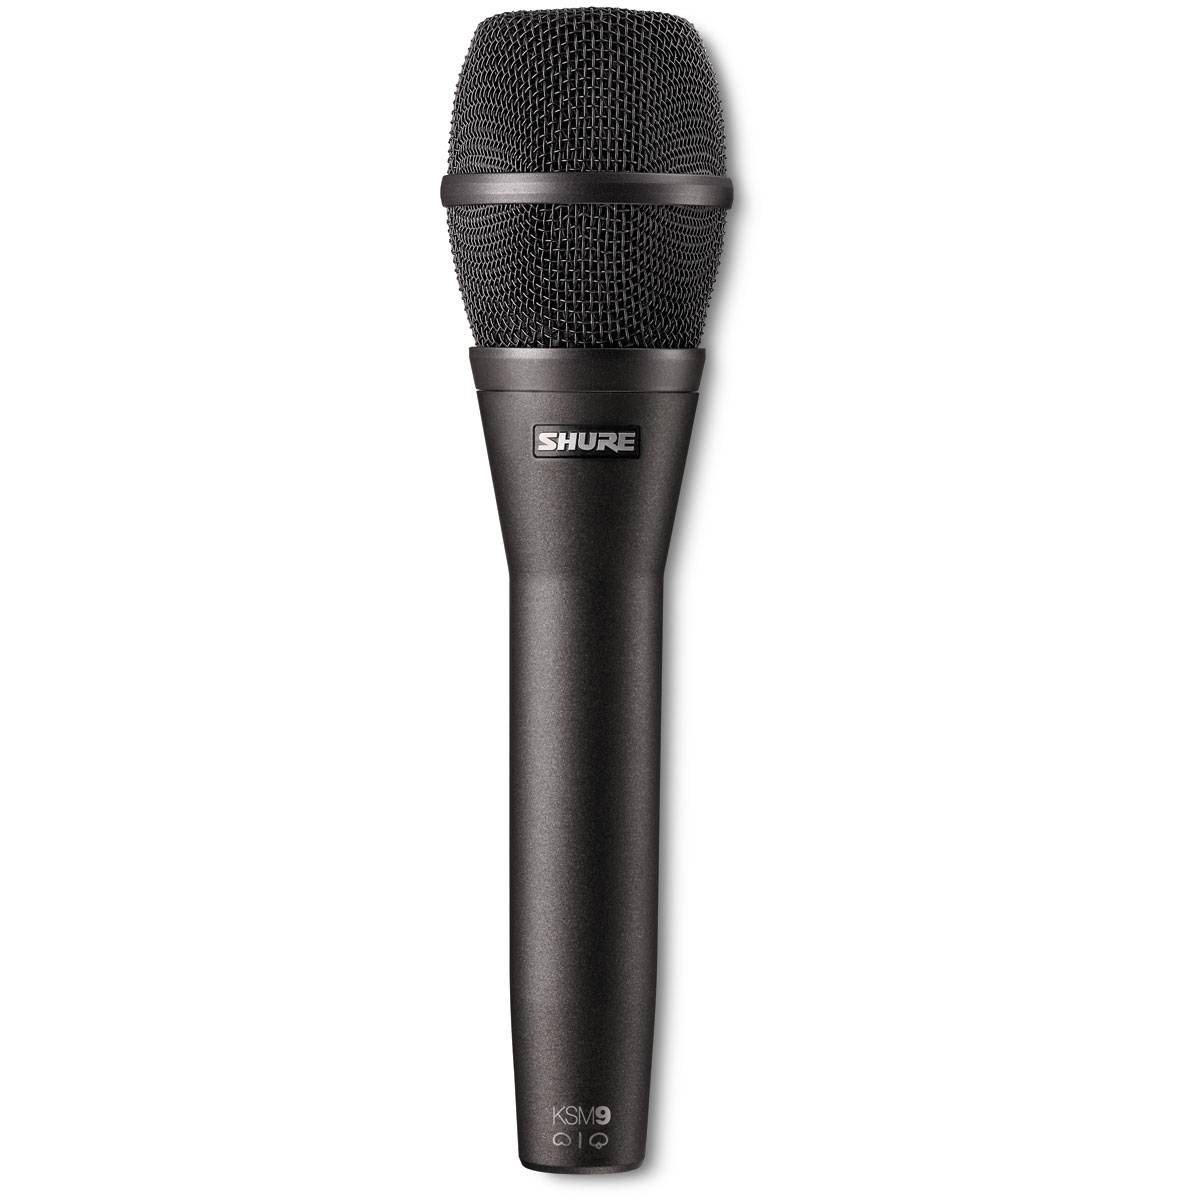 SHURE KSM-9 Charcoal Grey Condenser Microphone